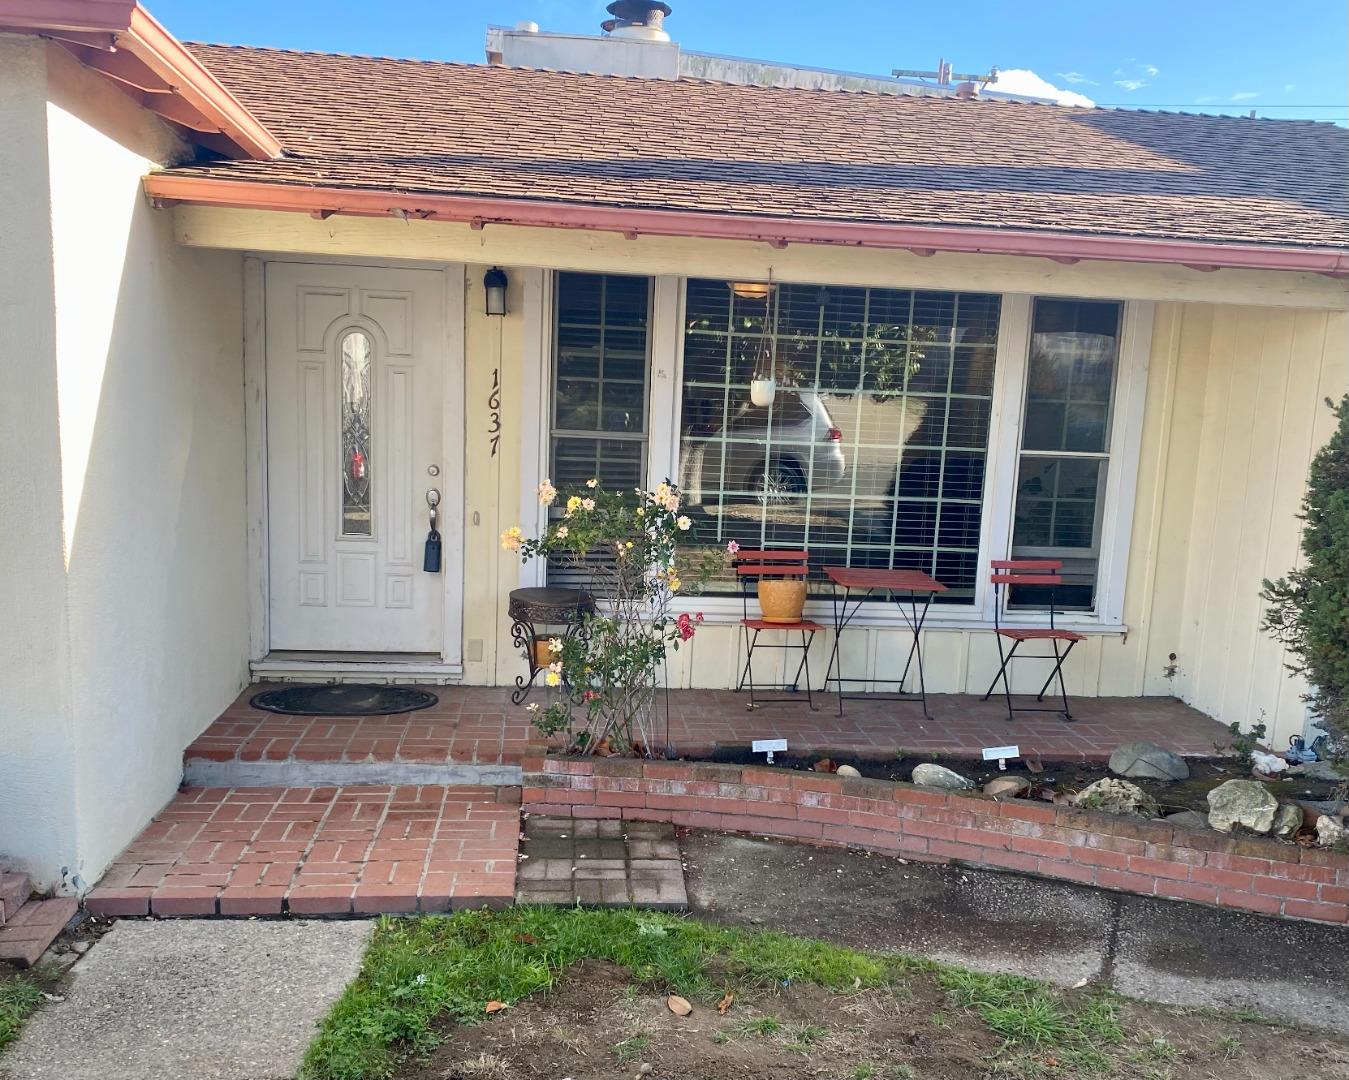 This is a 3 bedroom / 2 Bath home with lots of potential. The back of the house has a spacious unit with a bathroom, but no kitchen. This unit has a separate entryway that can be accessed from the street. Great Bay Hill neighborhood location, and is within walking distance to the shopping center. Centrally located with easy access to highways 280 and 101, as well as 10 minutes from SF Airport.